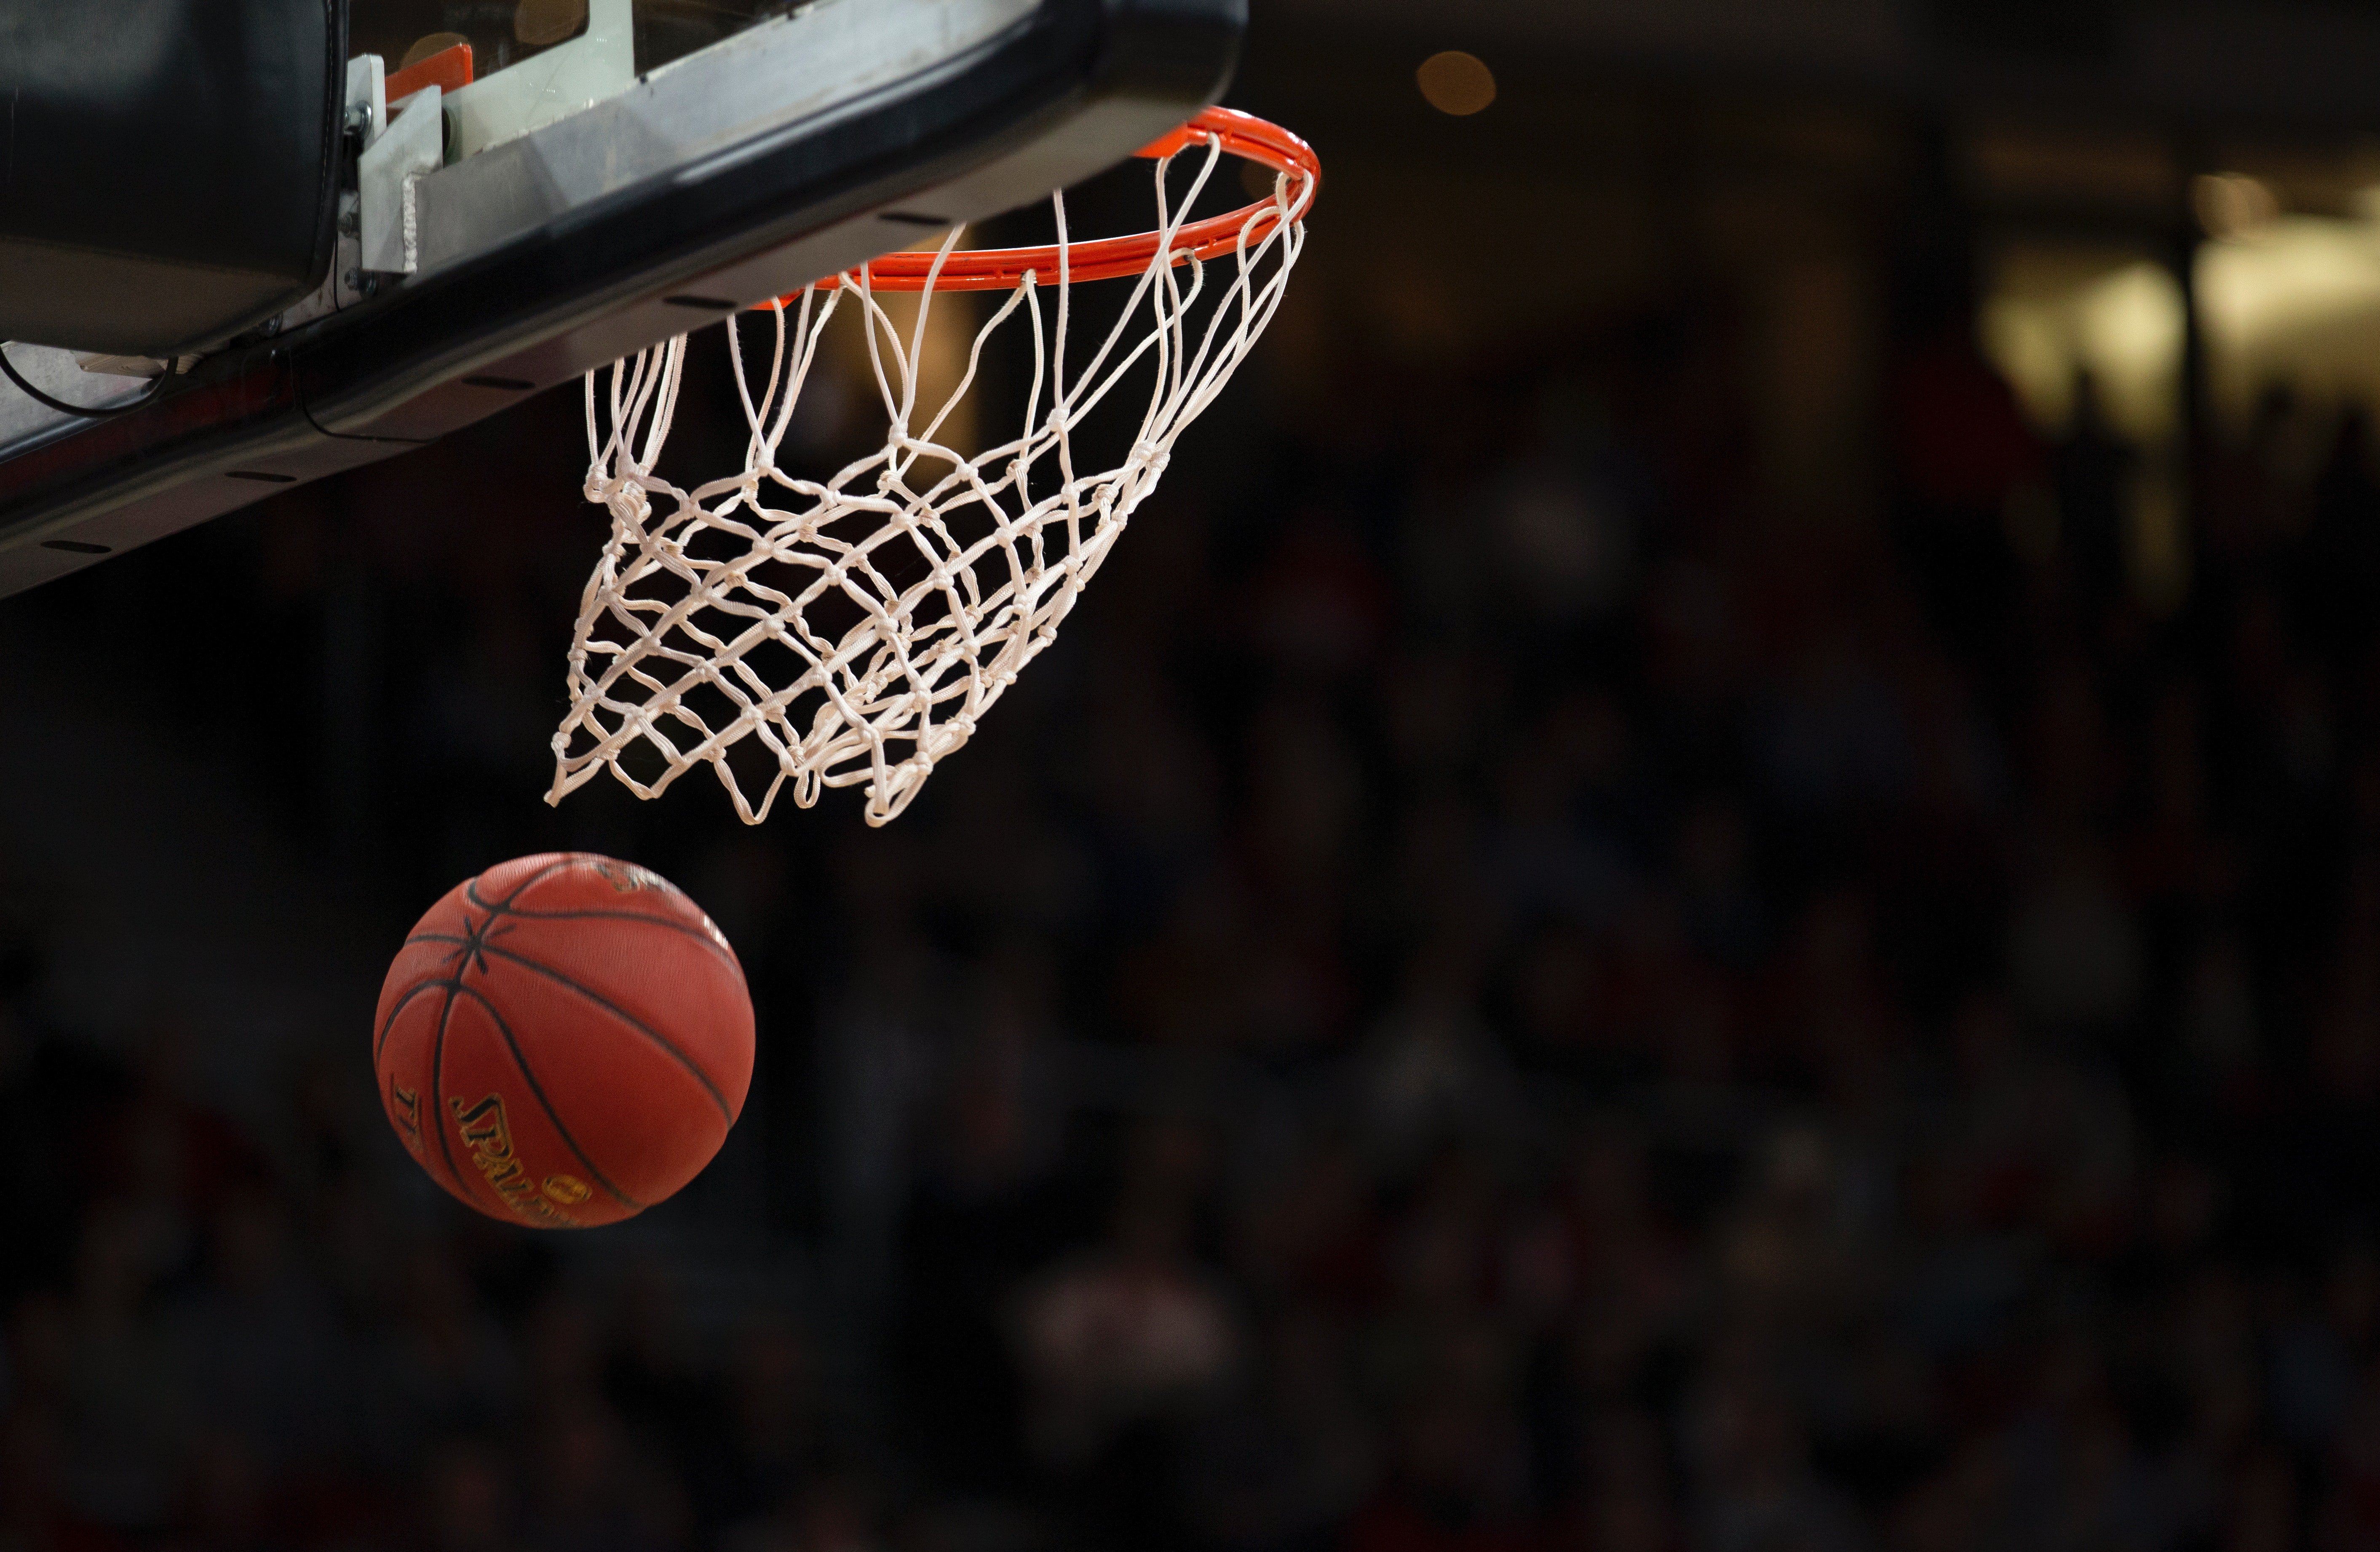 Picture of a Spalding basketball dropping after going through a white net. | Source: Pexels/Markus Spikse